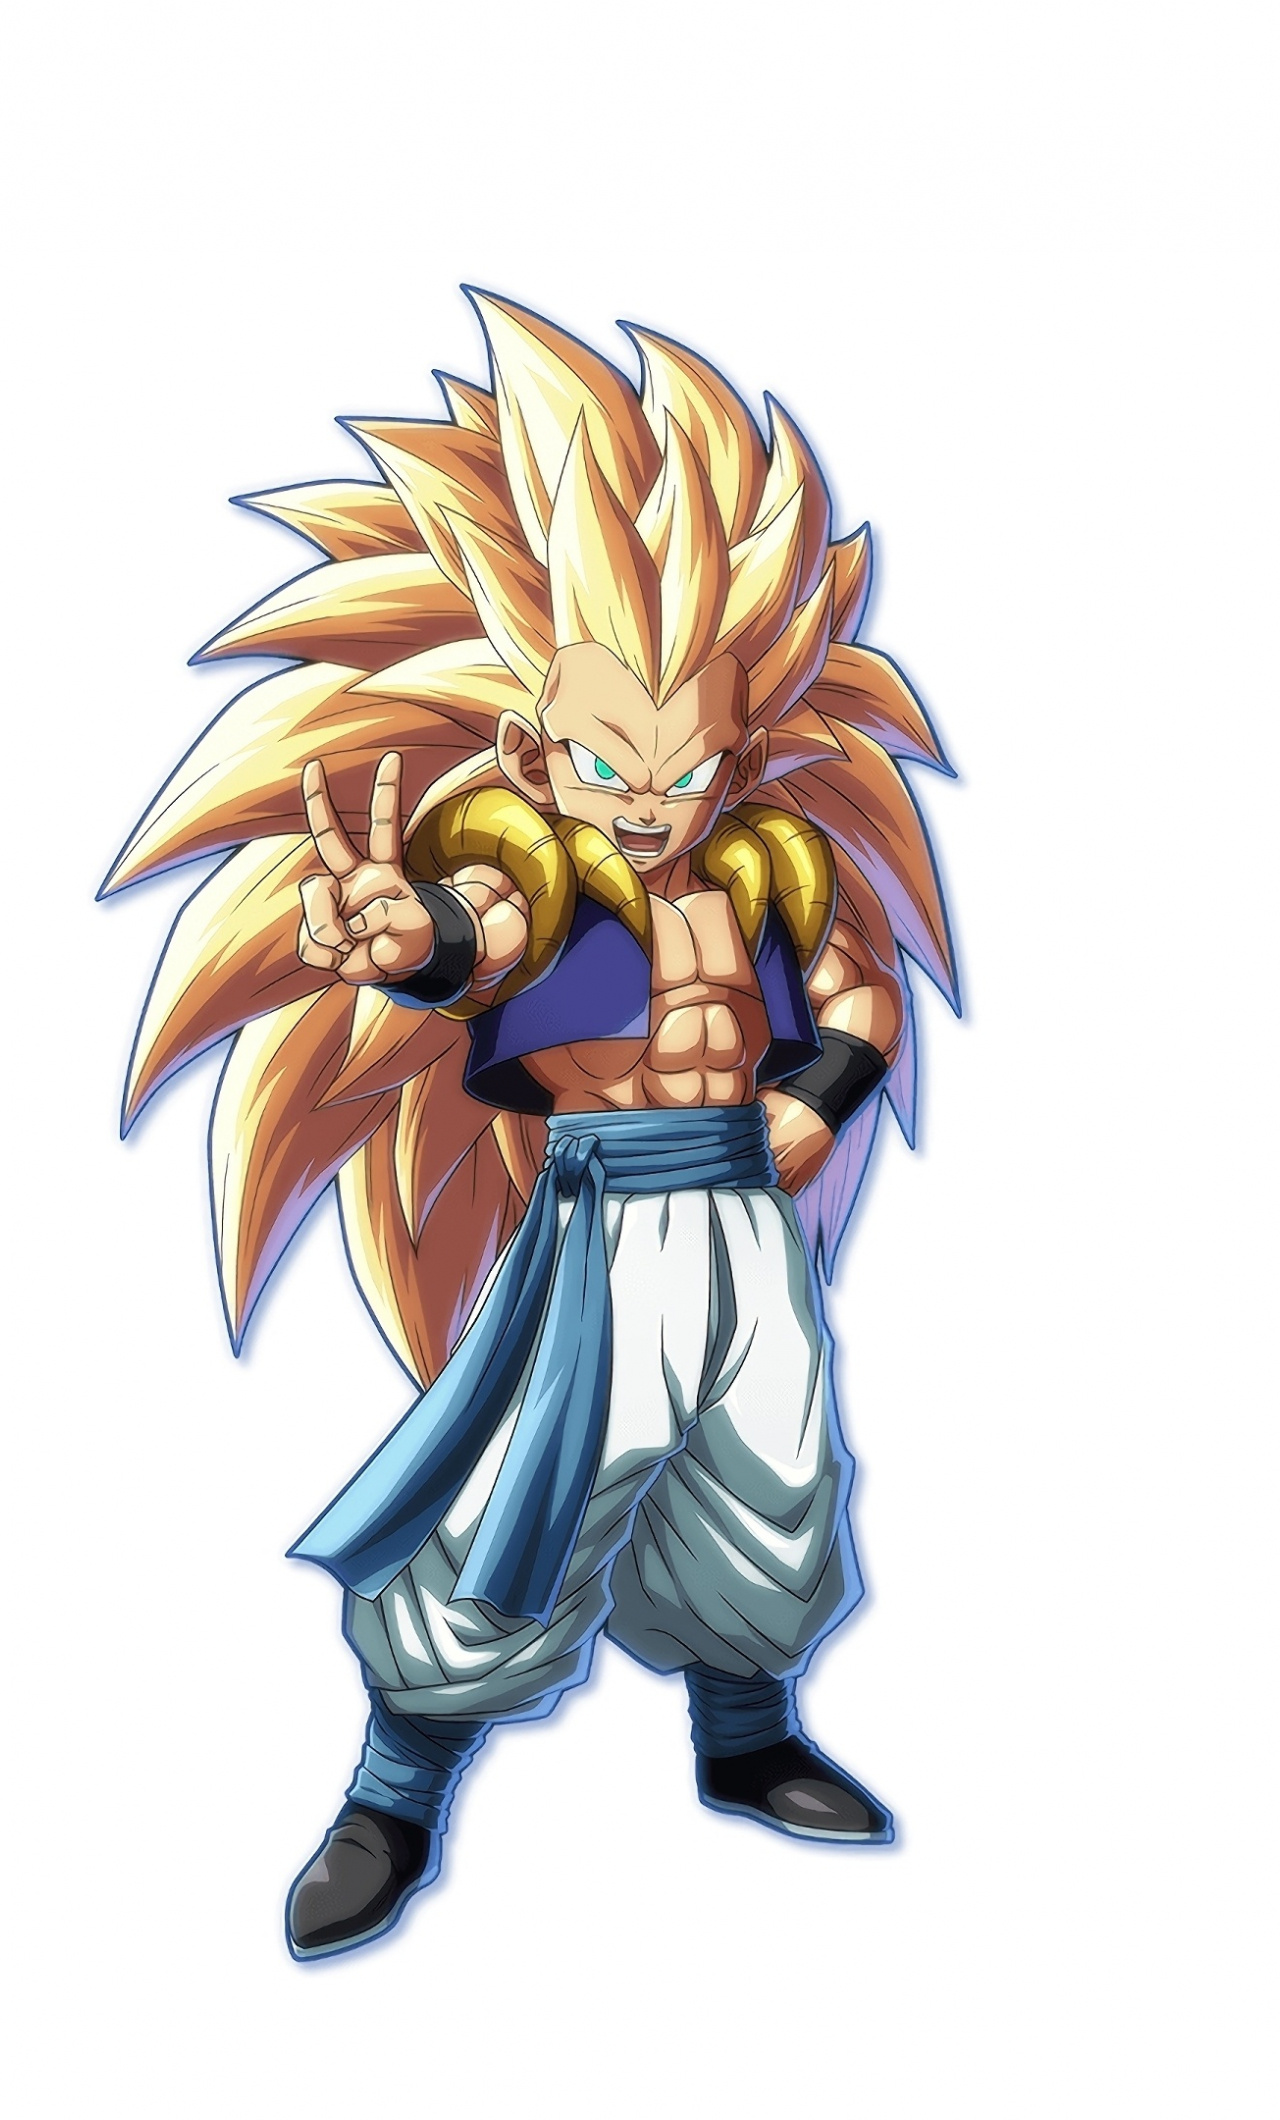 Gotenks: Anime characters, A Japanese anime television series produced by Toei Animation. 1280x2120 HD Background.